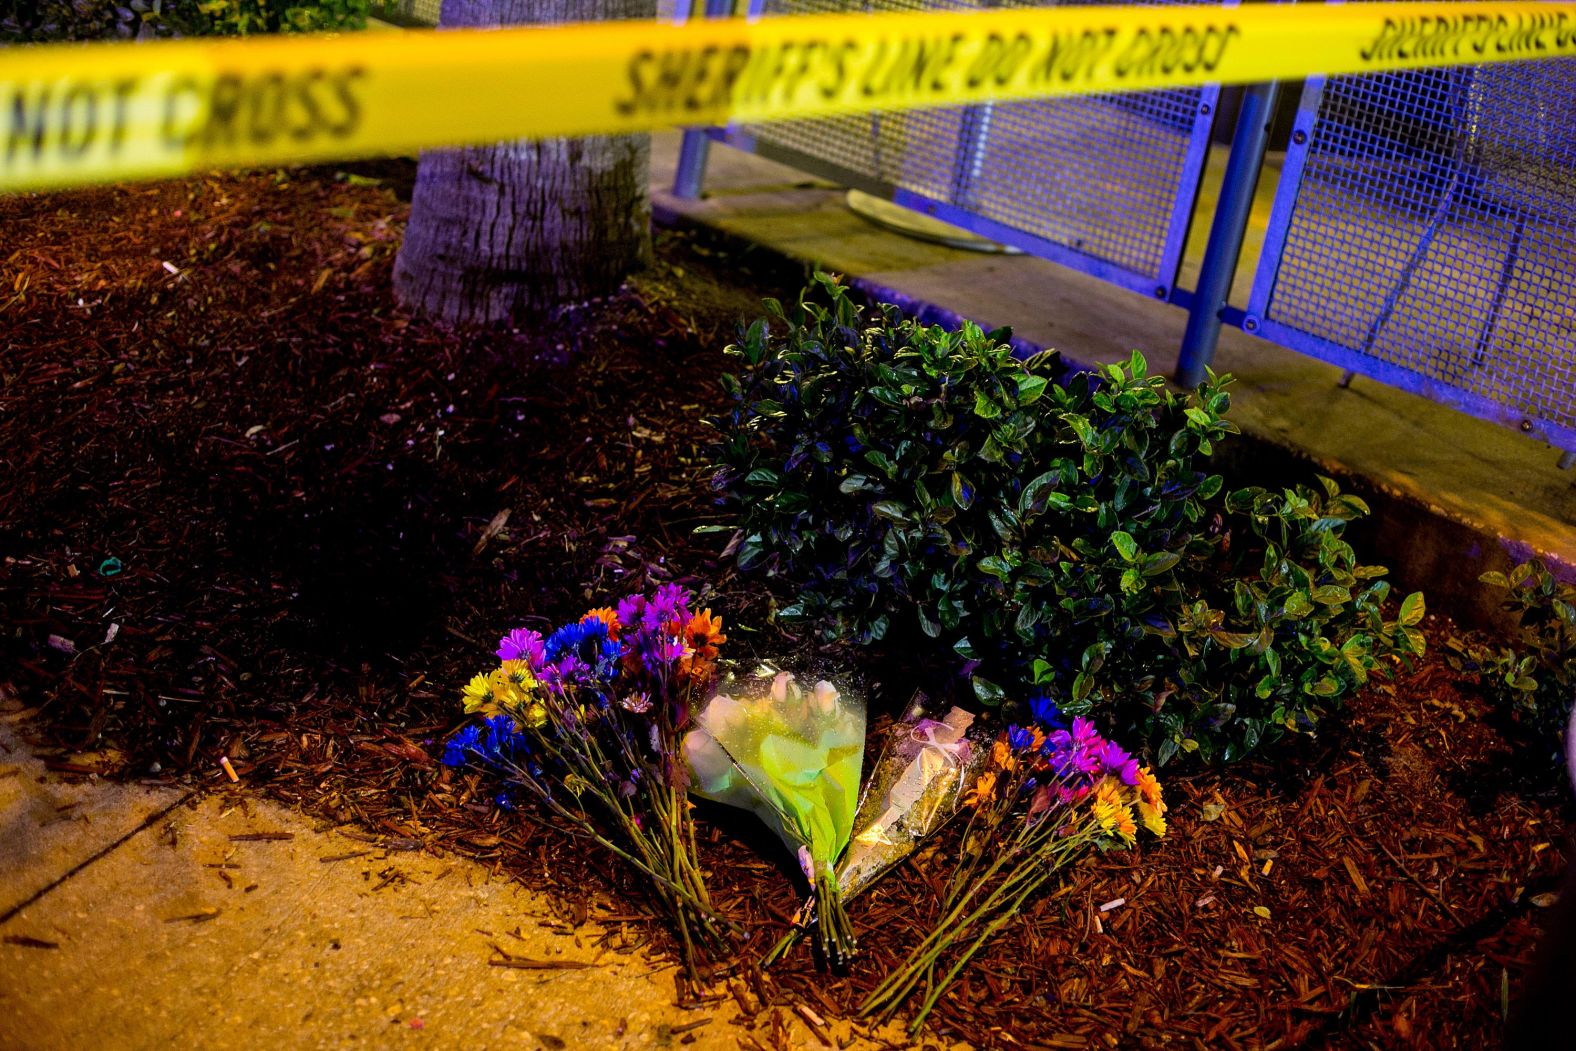 Flowers and police tape are seen near the Pulse nightclub.